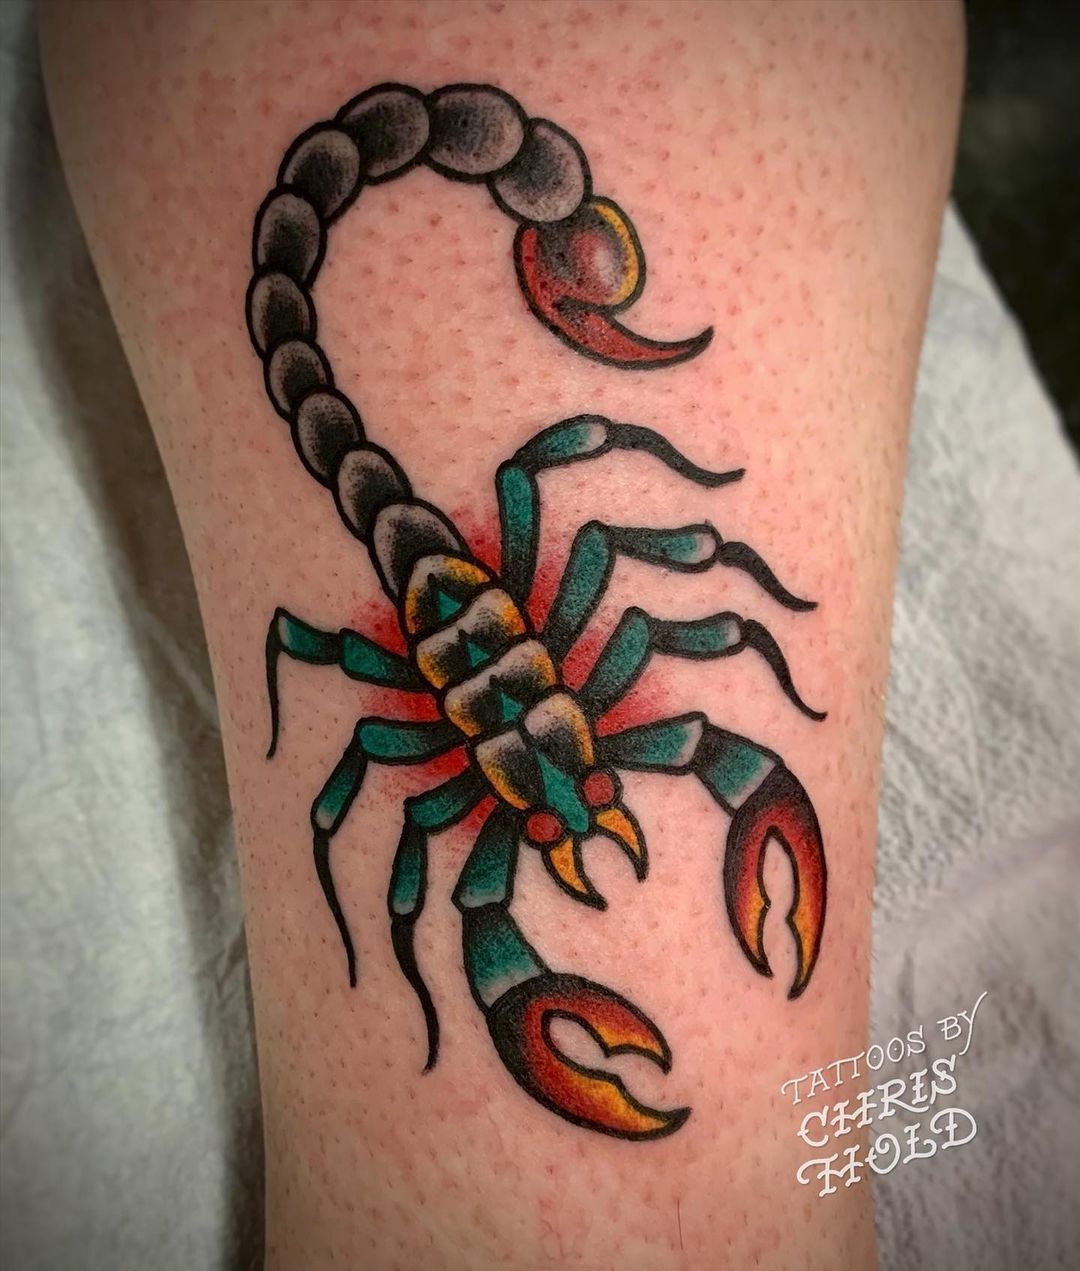 Tattoos by Chris Hold — Made this scorpion for Taunya. Always a pleasure...